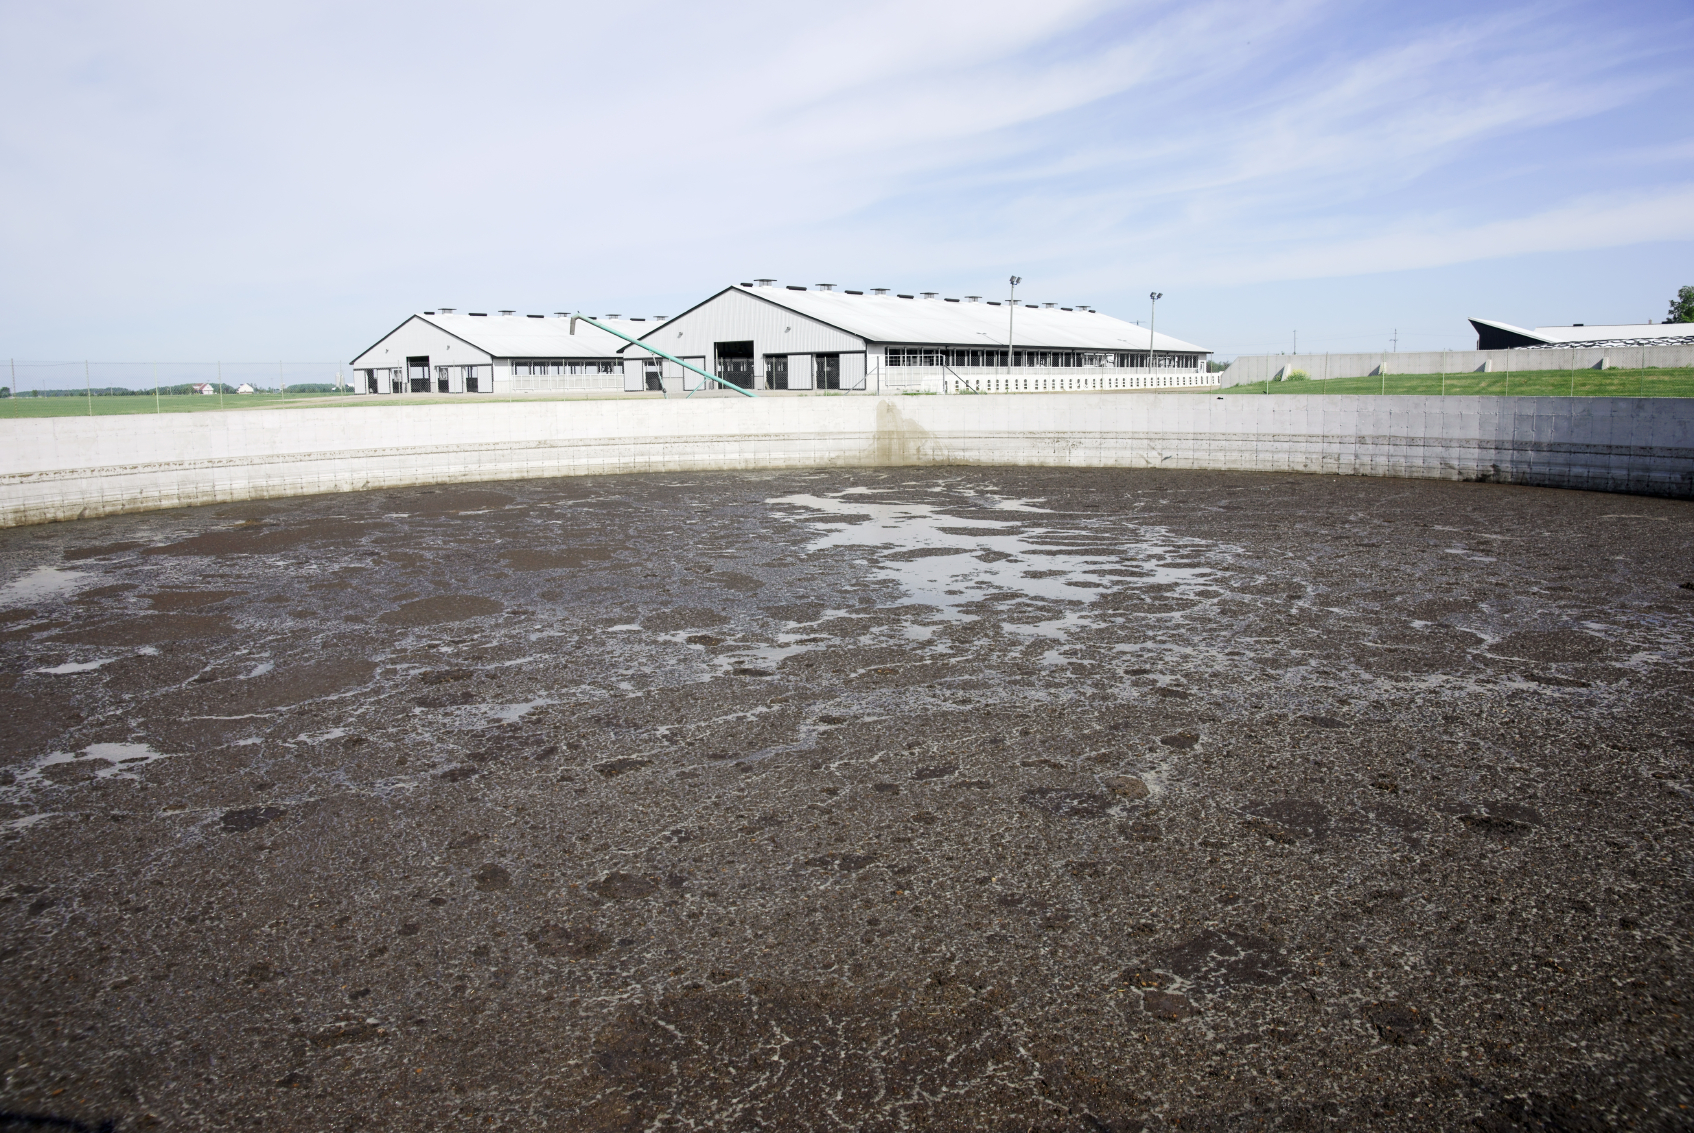 An Improperly Granted Factory Farm Permit Can Threaten Waterways with Toxic Waste from Manure Lagoons